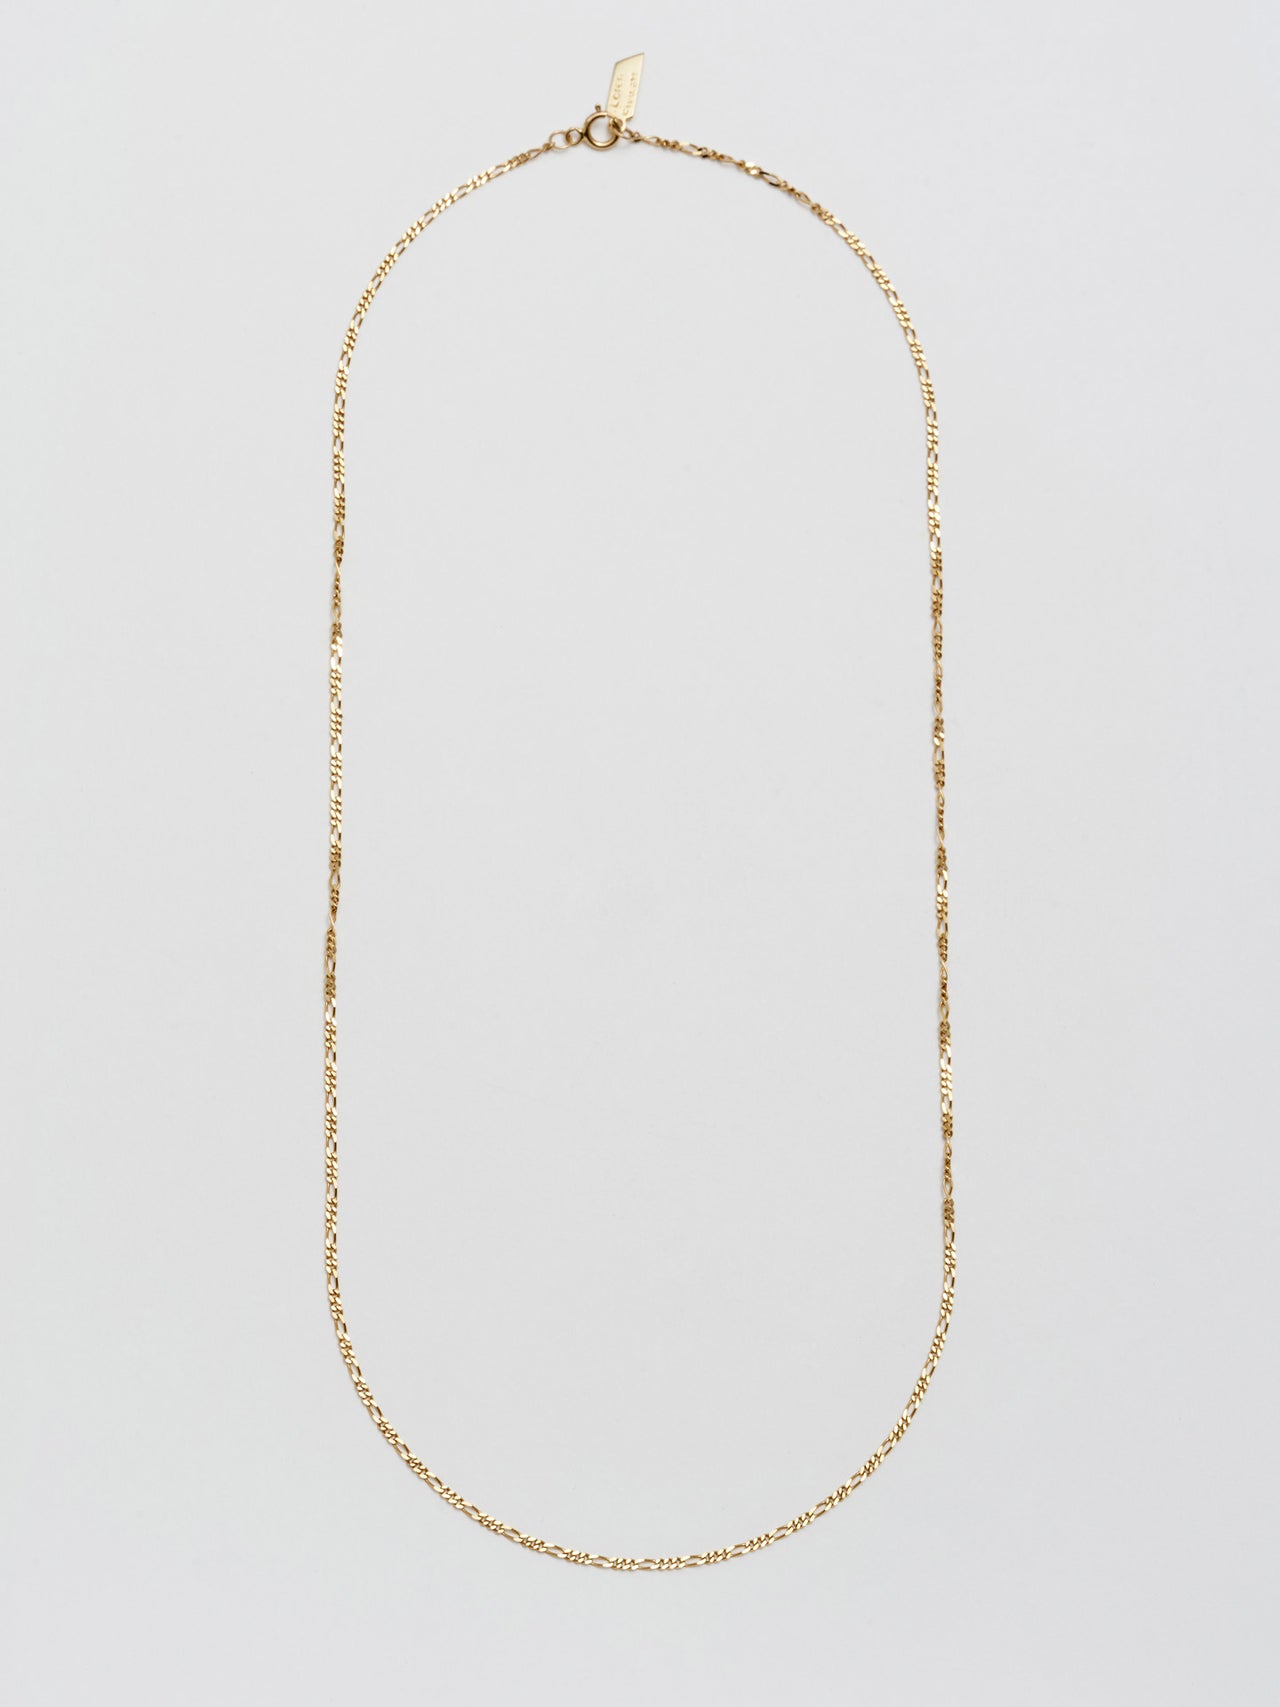 Baby Fig Chain Necklace: 14kt Yellow Gold Figaro Chain